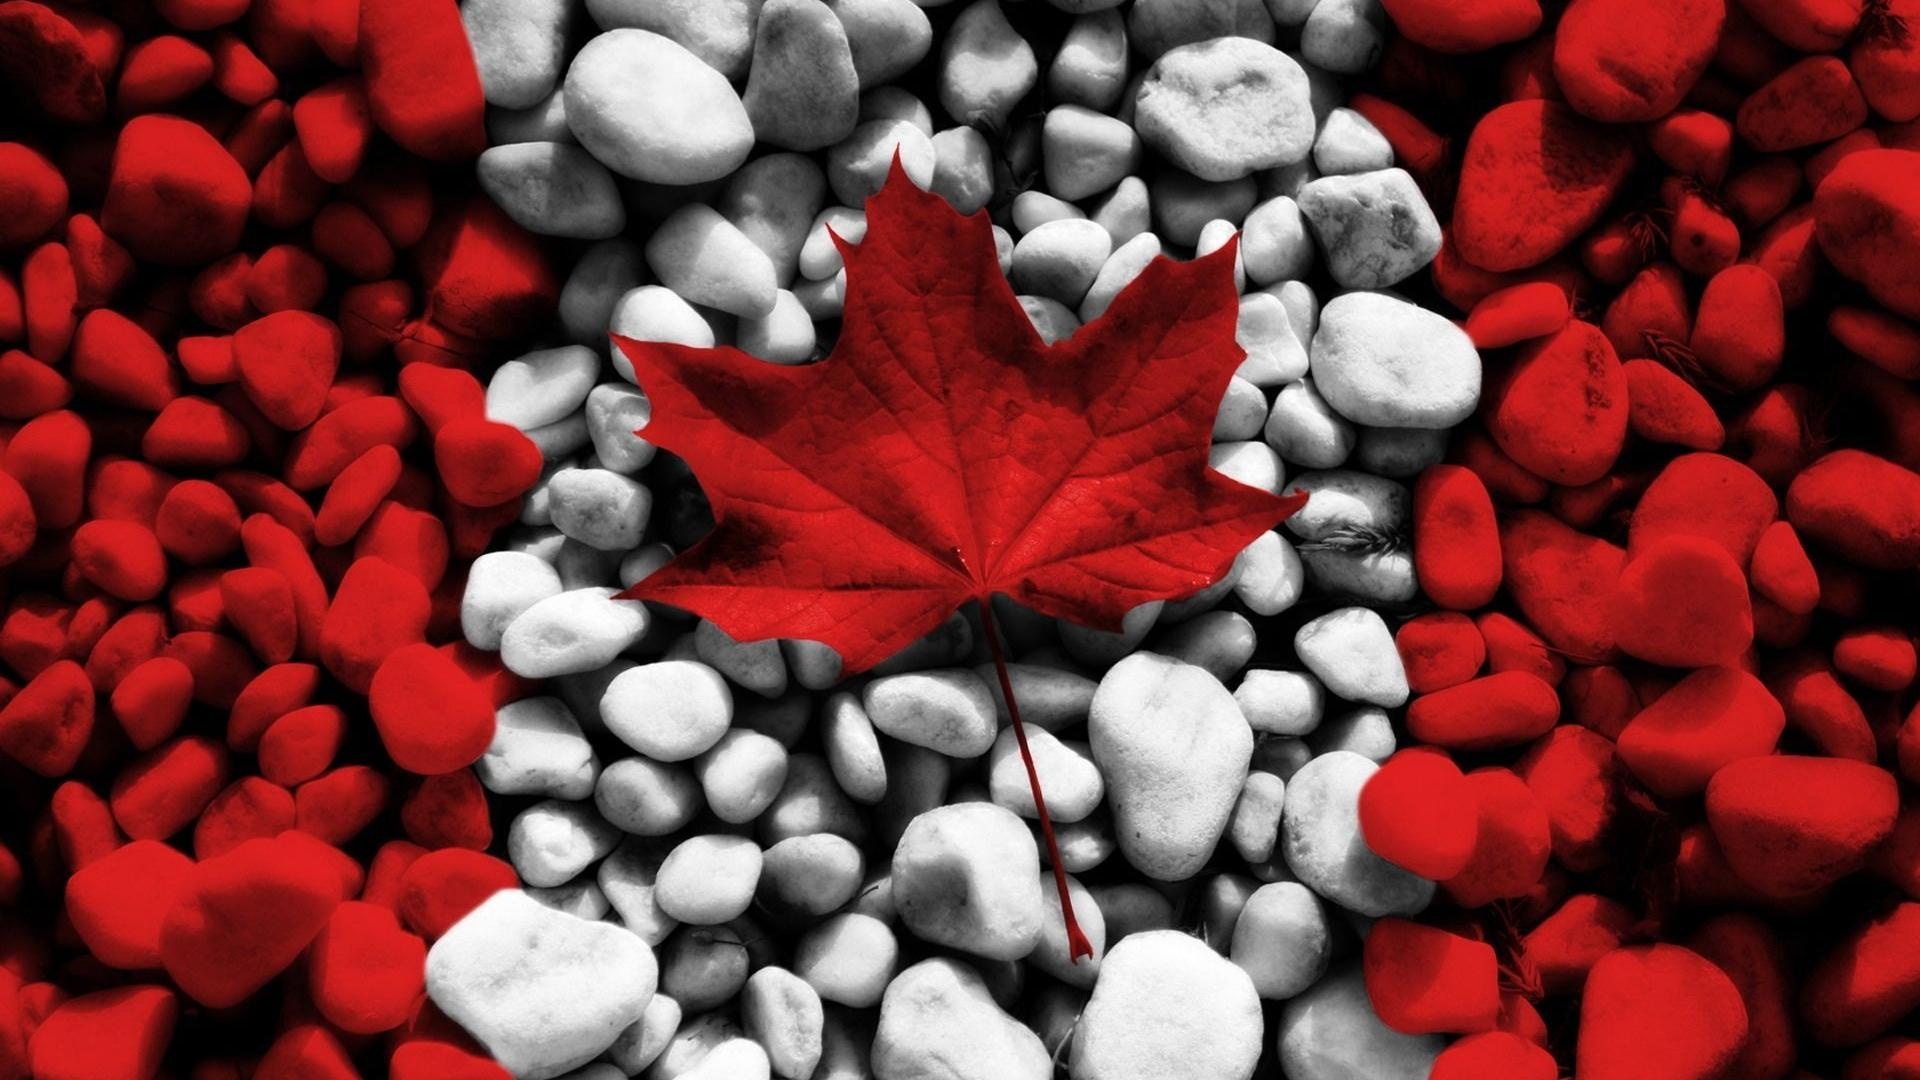 Maple Leaves Canada - Wallpaper, High Definition, High Quality, Widescreen